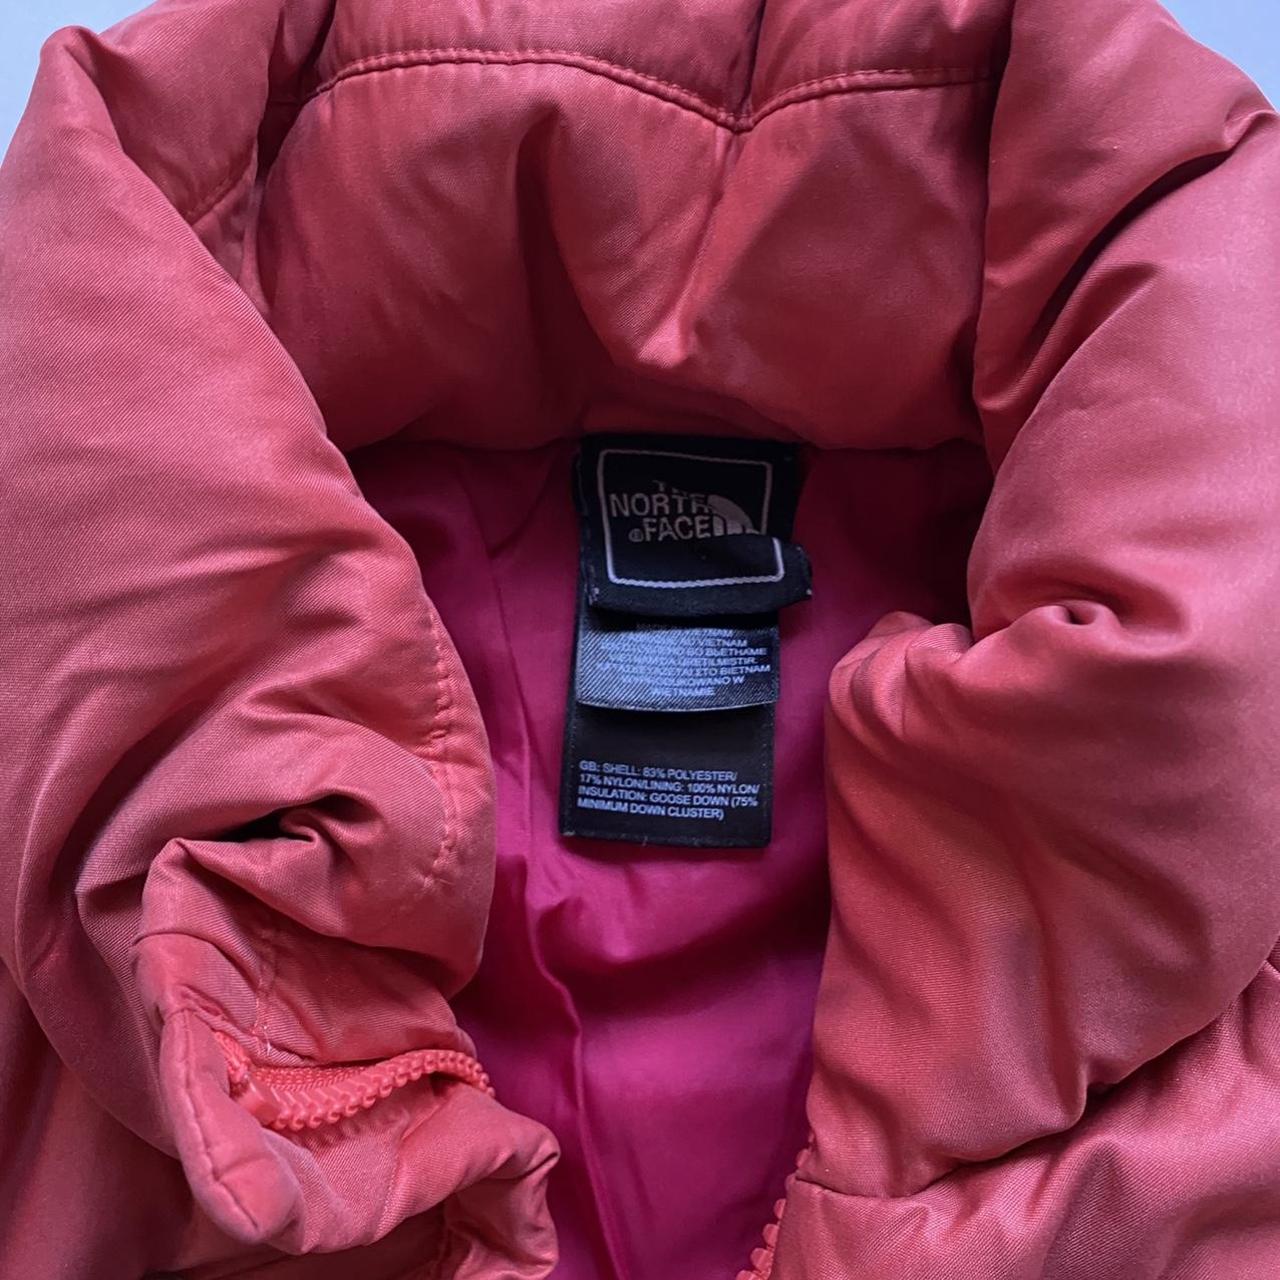 The North Face Women's Pink Jacket | Depop